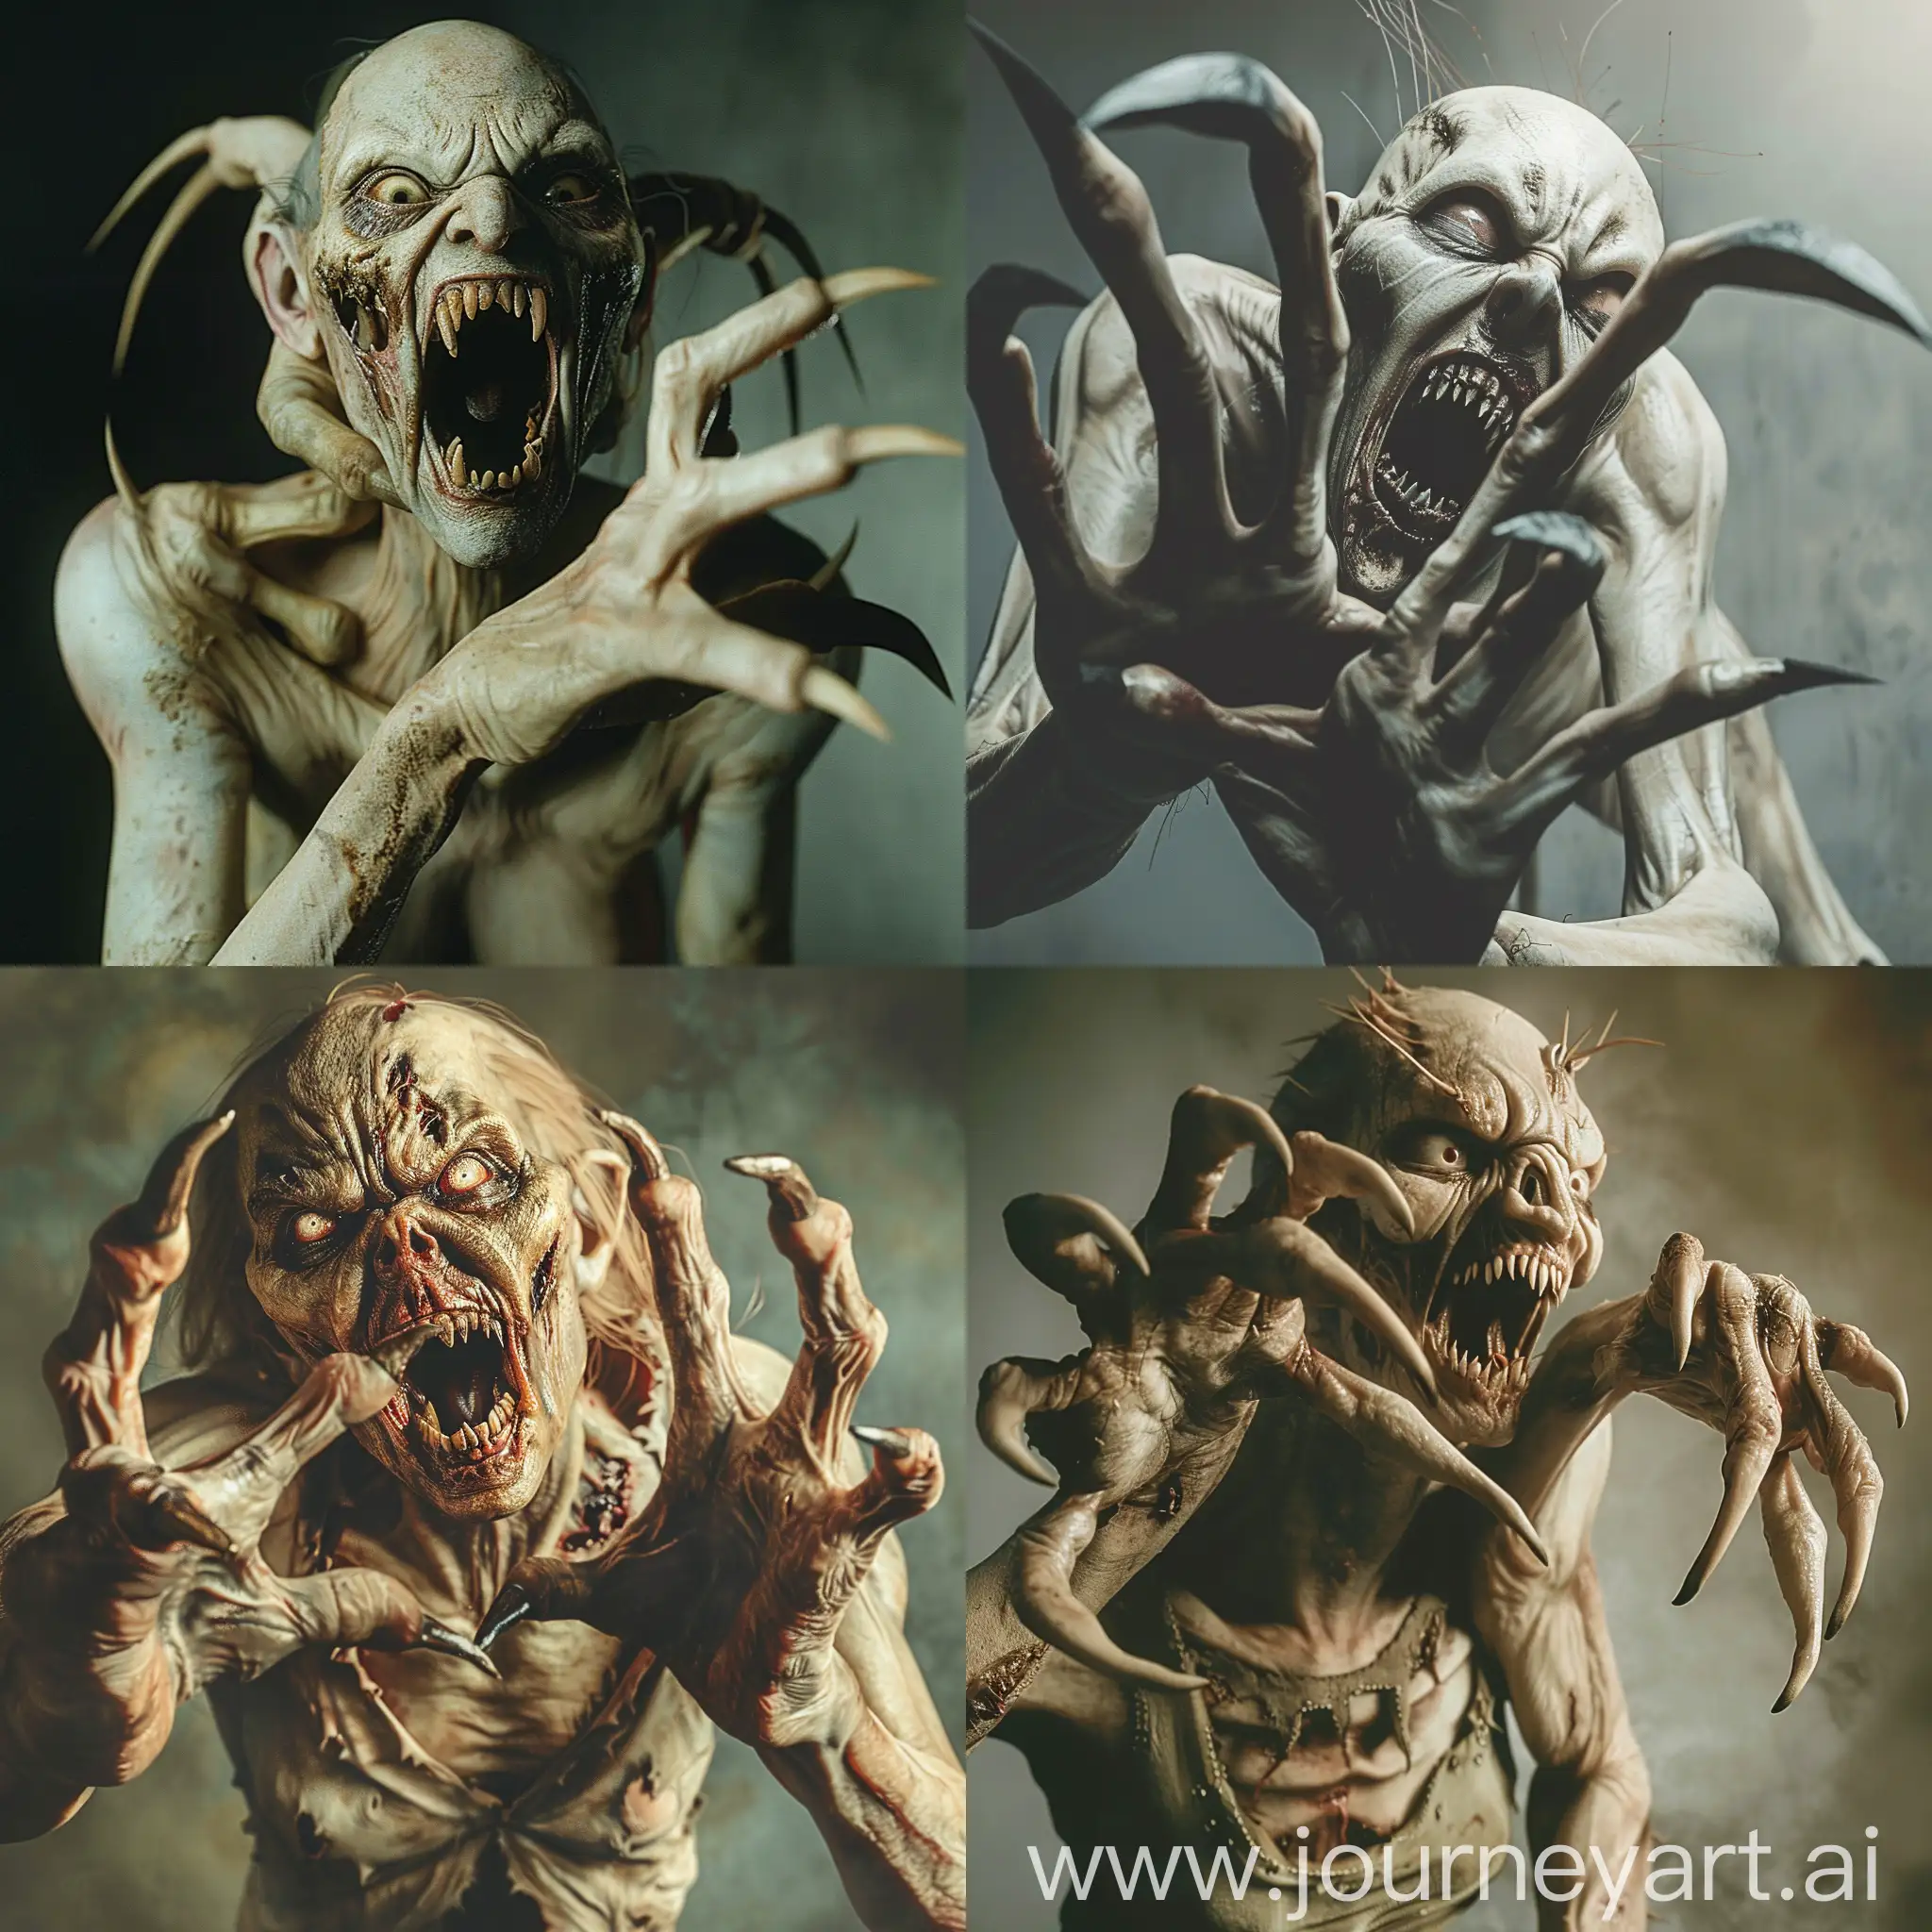 Generate a chilling description of a zombie woman with long, curved pointed nails protruding from her five fingers like menacing claws. Her skin is pale and rotting, her eyes vacant, and her mouth wide open, revealing a row of sharp, pointed teeth resembling fangs while in a dynamic aggressive pose.